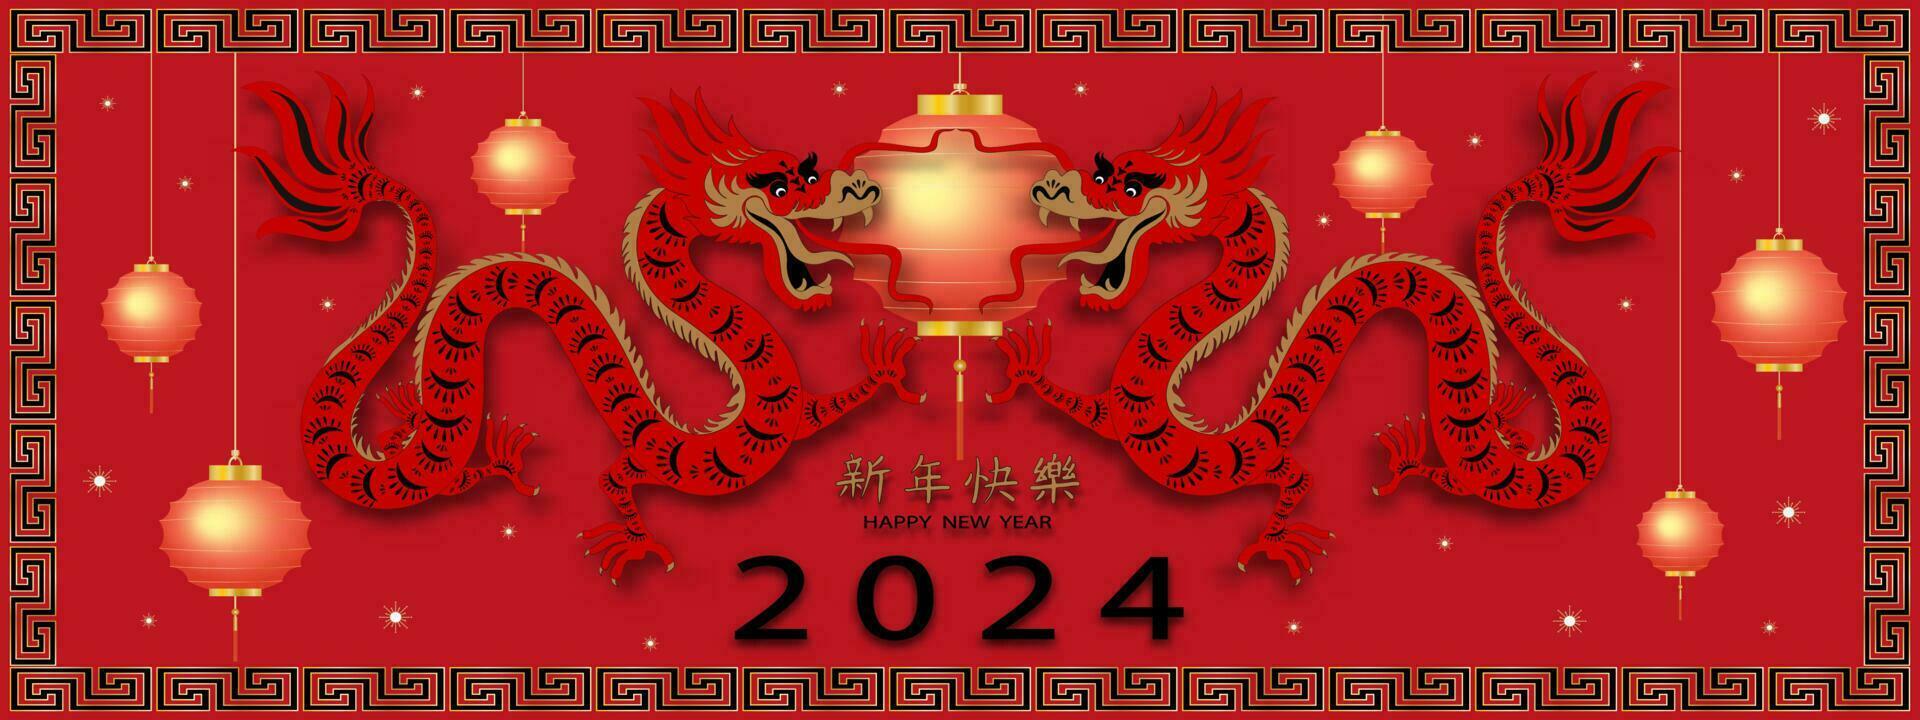 Happy Chinese New year 2024,Red Dragon Zodiac Sign with Lunar Lantern paper cut on red background,Asian Dragon elements on gold wallpaper design.Translation,Happy New year 2024 year of the dragon vector